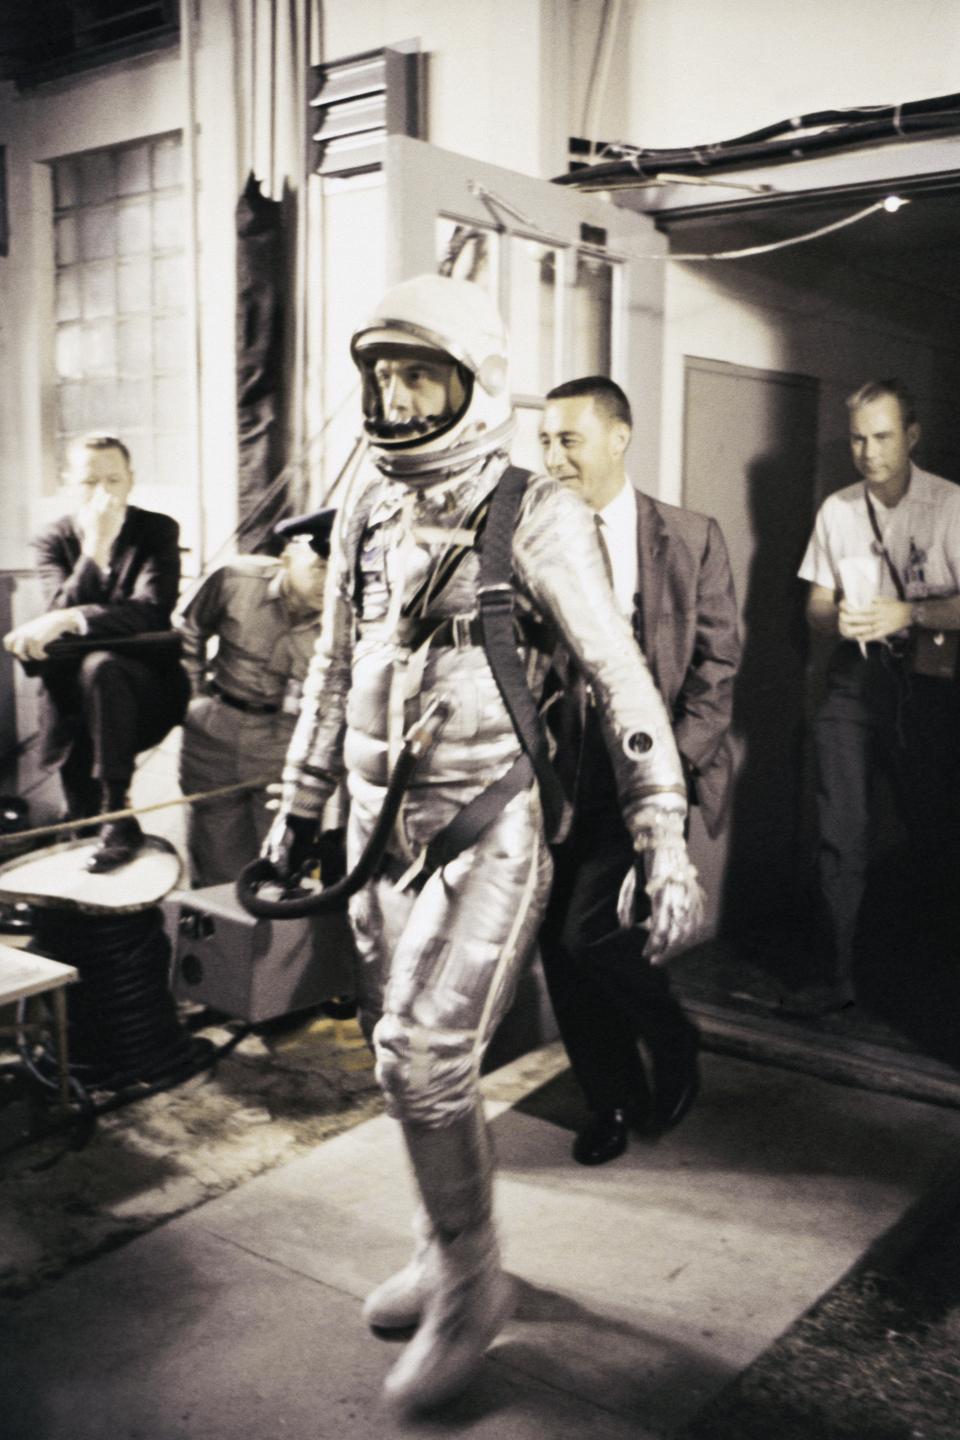 Astronaut Leroy Gordon Cooper walks in his Mercury spacesuit (Navy Mark IV) prior to the launch of his spacecraft Faith 7, on May 15, 1963 at Cap Canaveral, Florida, United States.